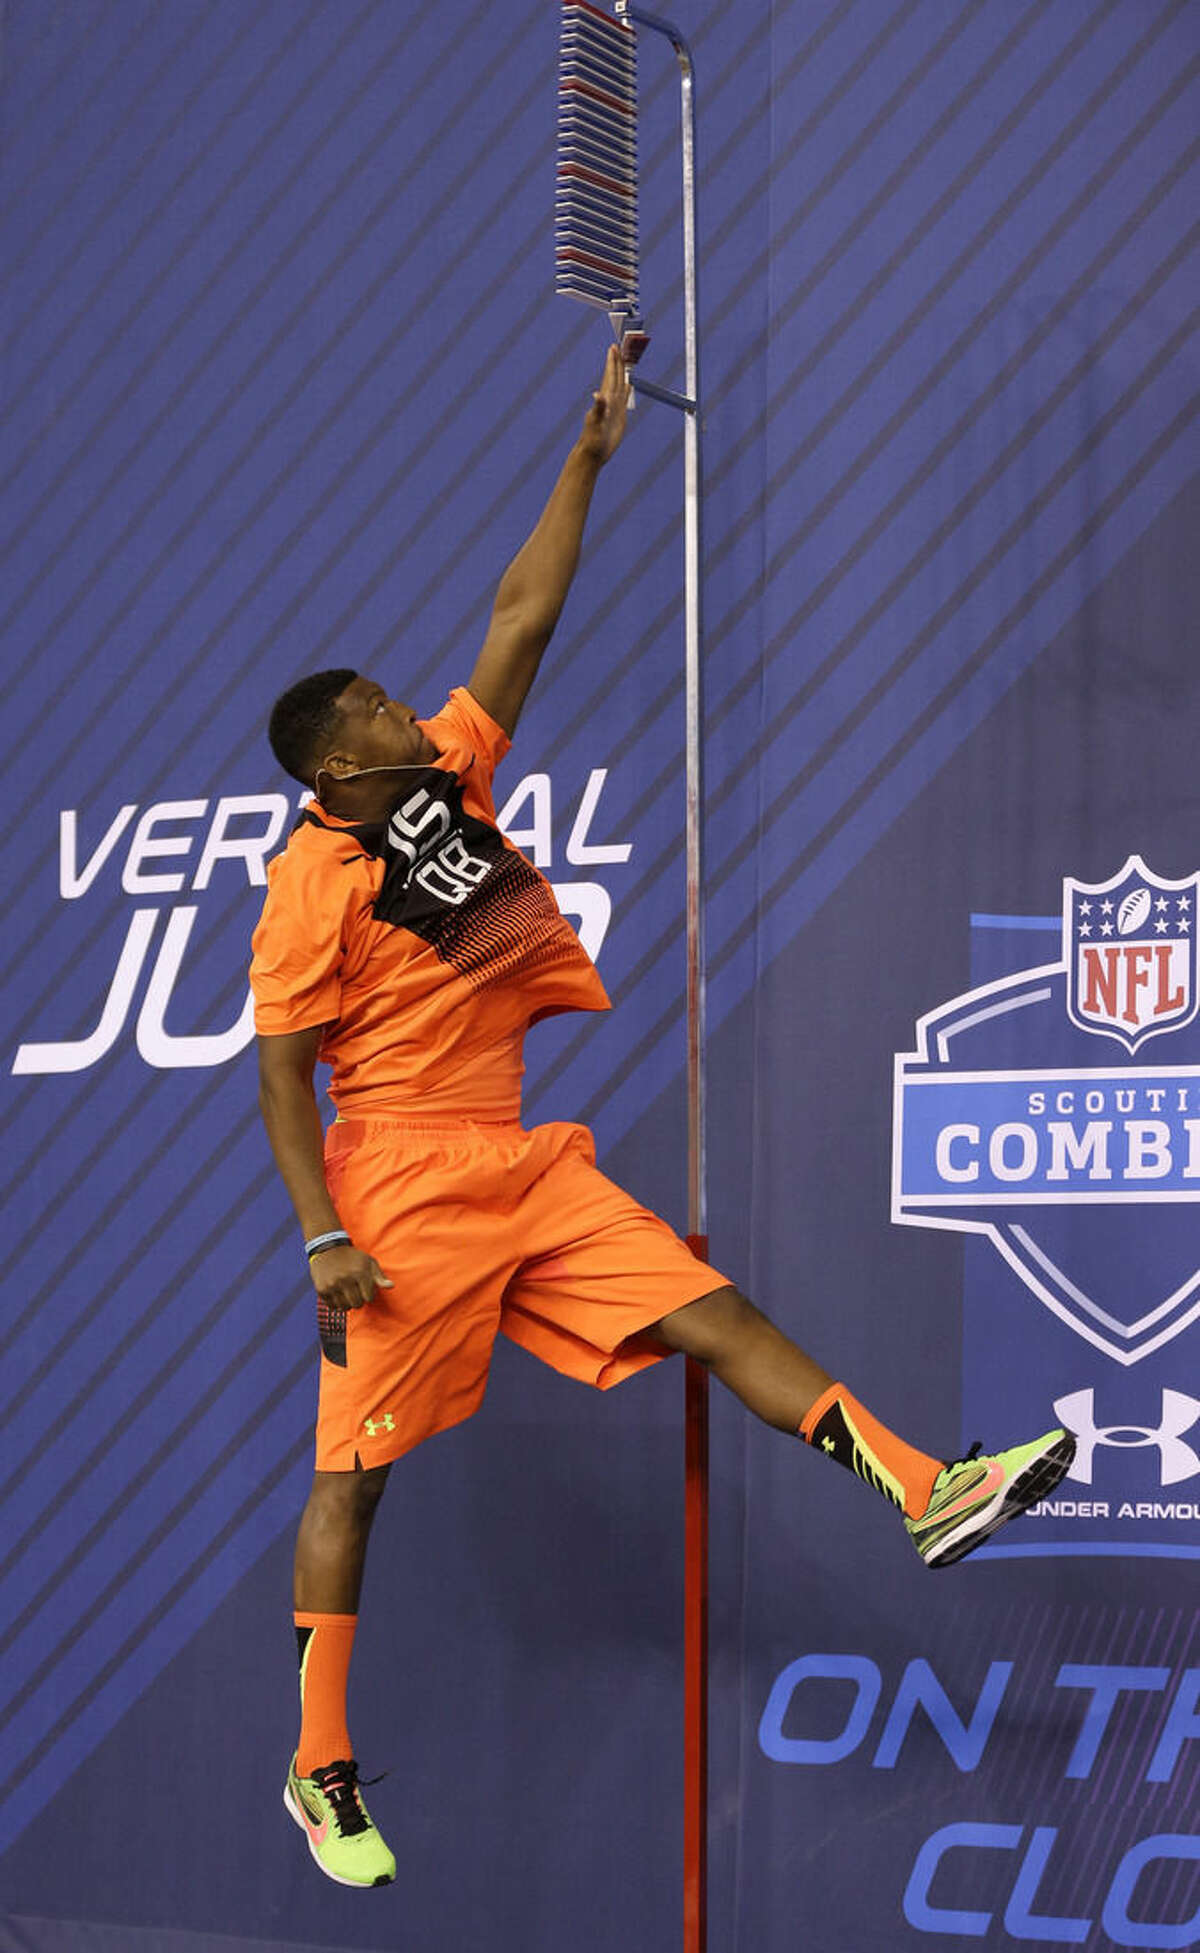 Florida State quarterback Jameis Winston leaps during the vertical jump drill at the NFL football scouting combine in Indianapolis, Saturday, Feb. 21, 2015. (AP Photo/David J. Phillip)